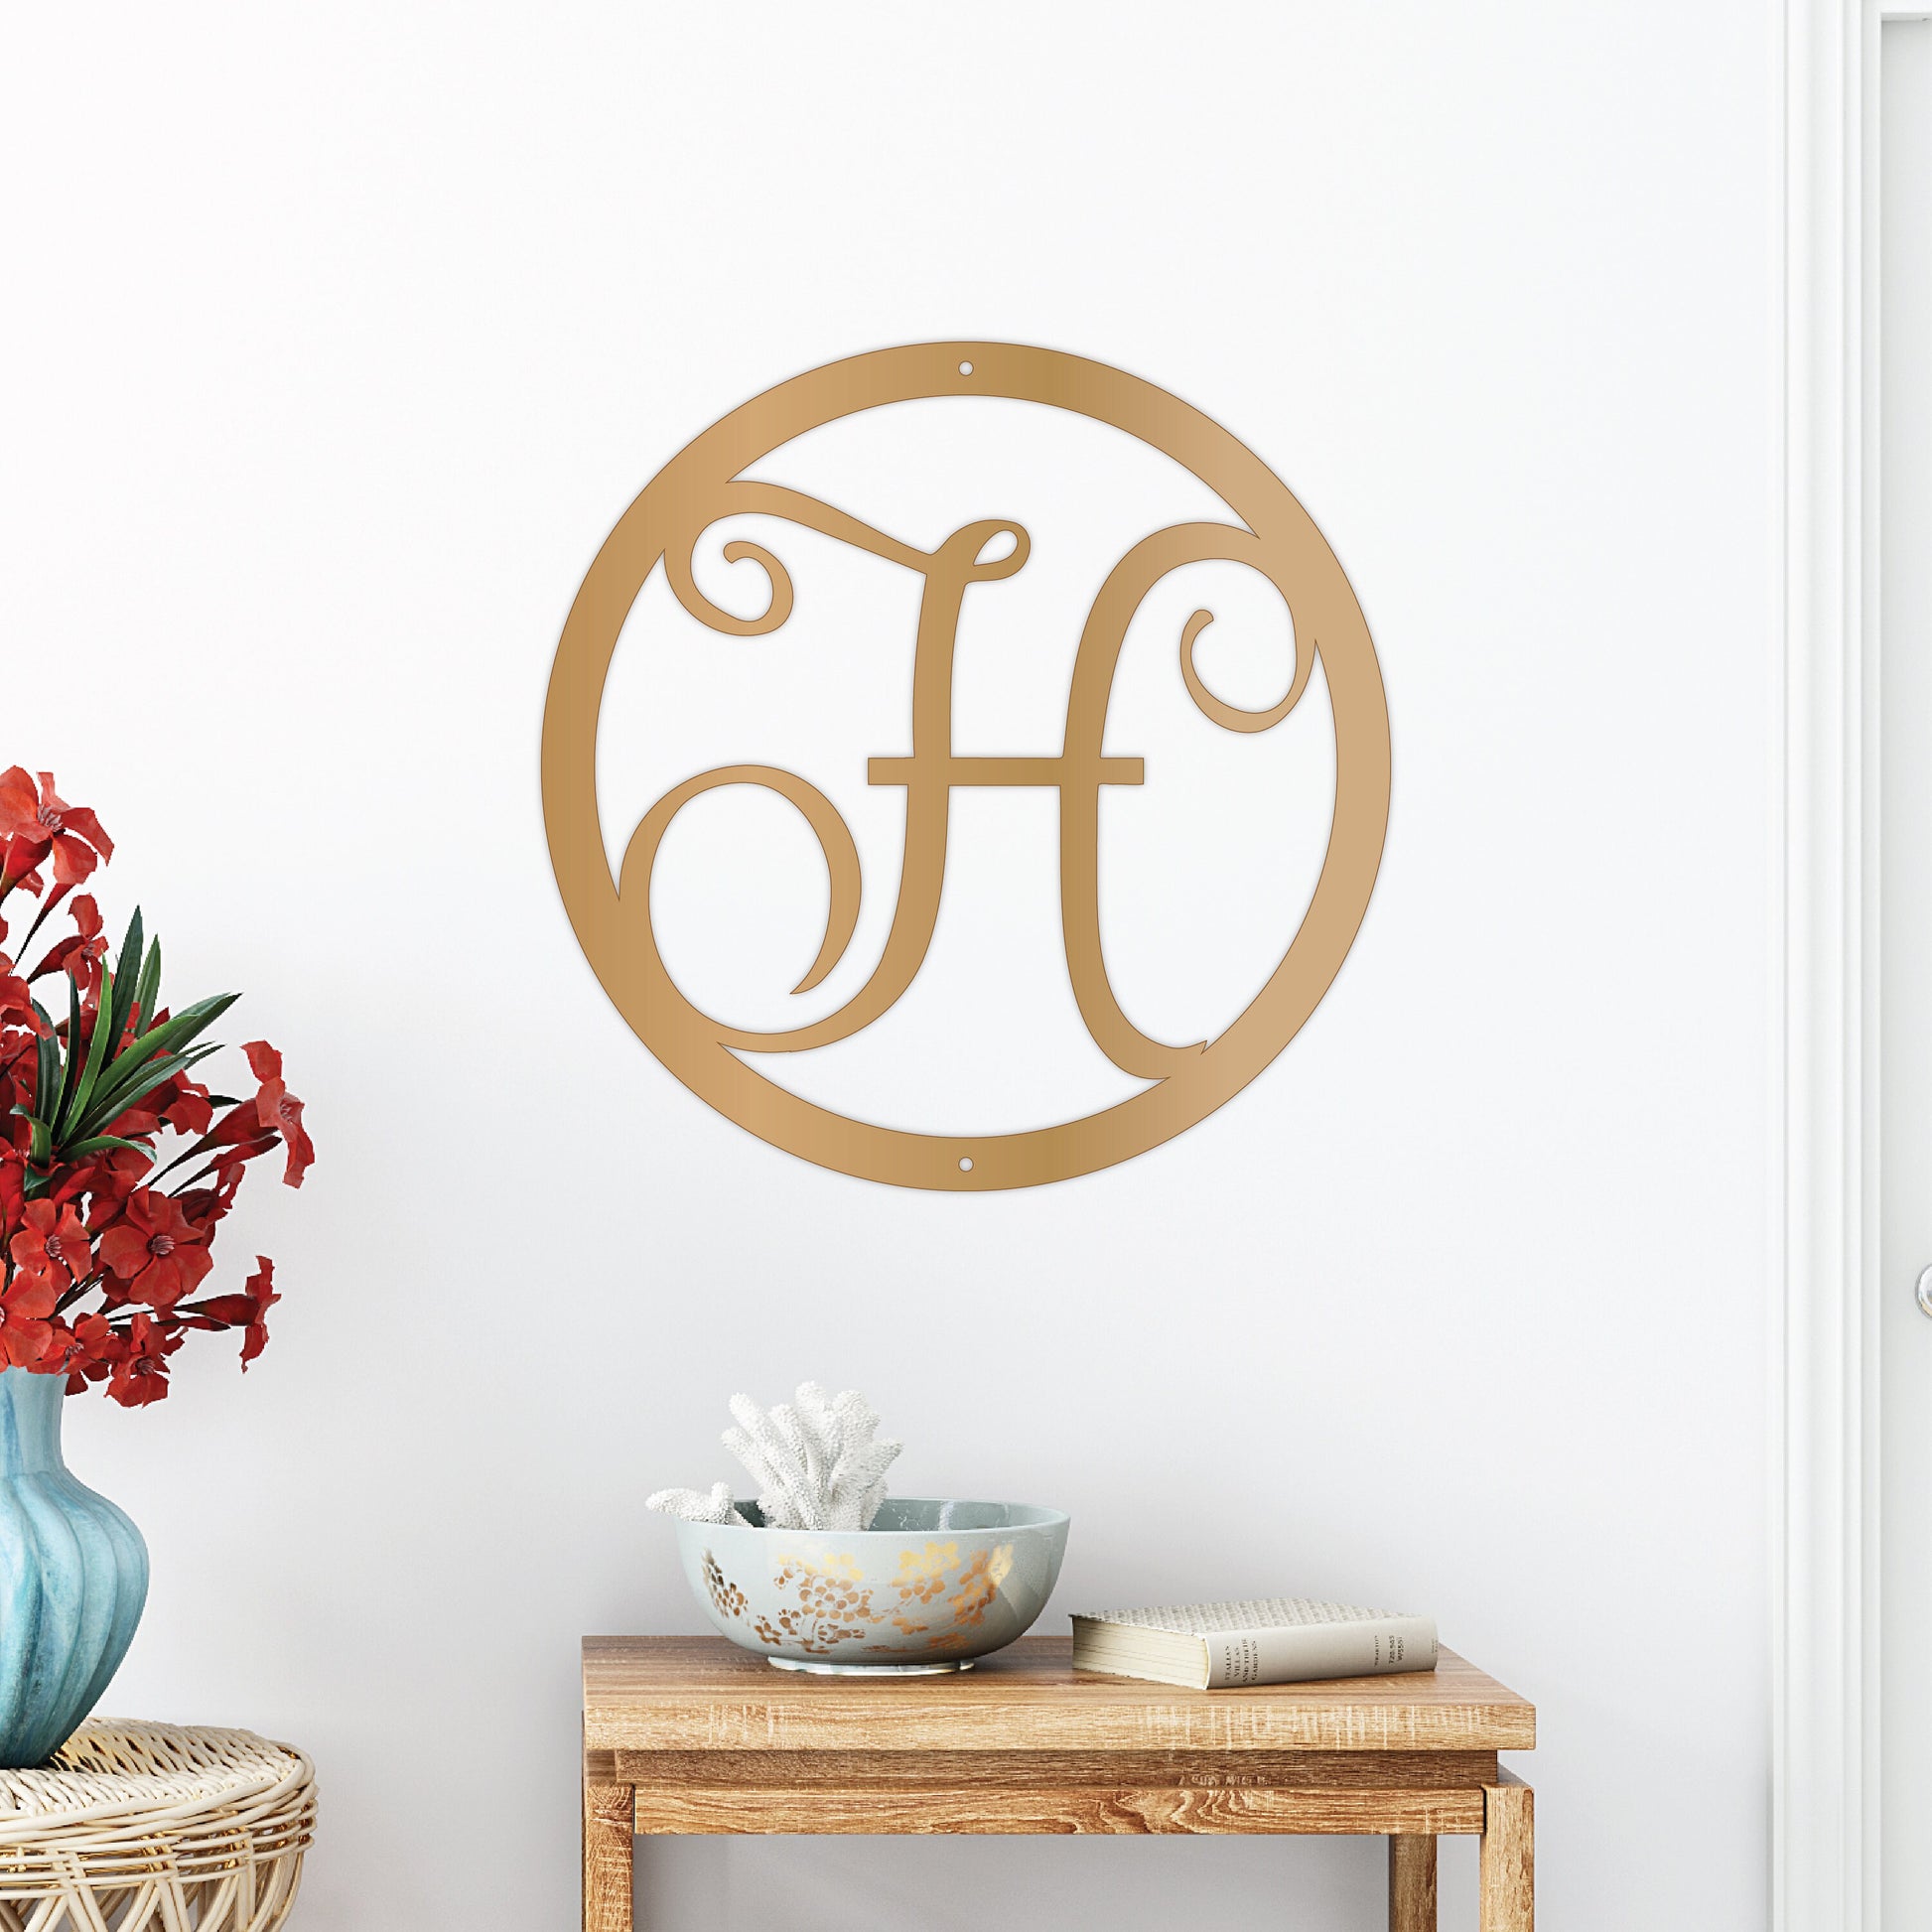 Personalized Family Name Monogram Sign, Decorative Metal Family Wall Décor, Custom Outdoor Last Name Initial, Farmhouse Chic Sign